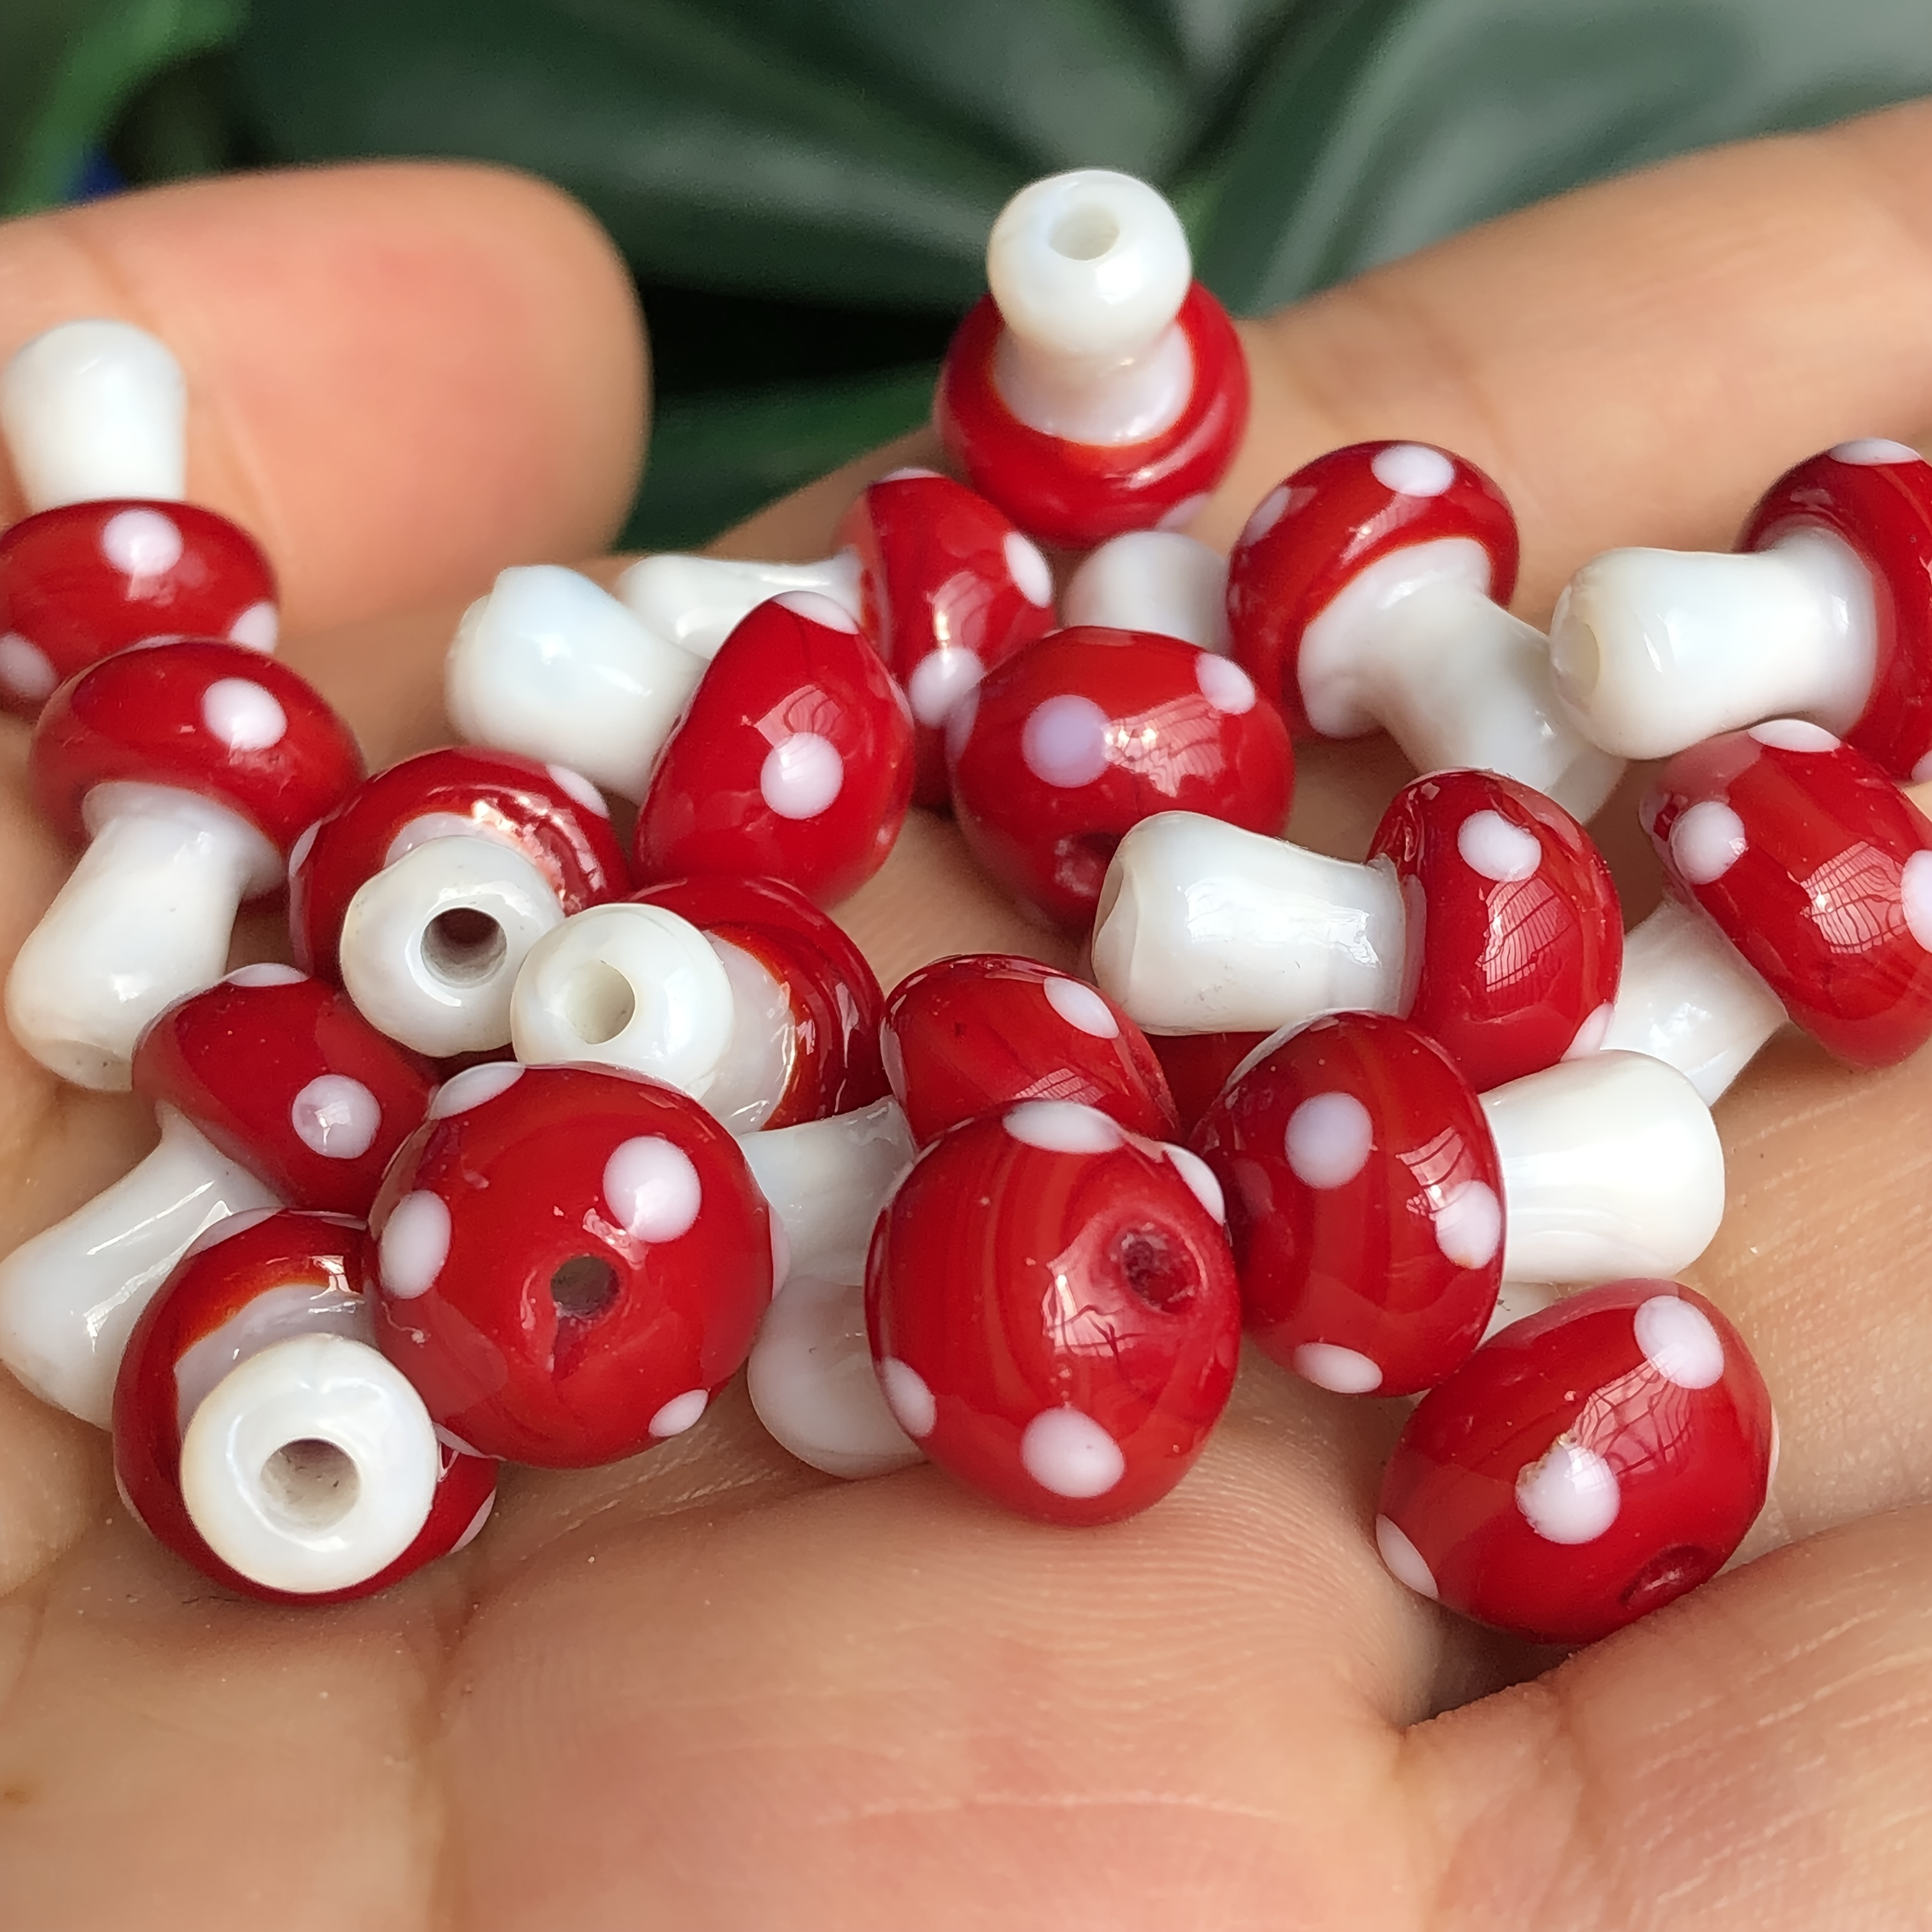 10x13mm 5pcs Colour Mushroom beads Glass Loose Spacer Bead for Jewelry  Making DIY Bracelets Necklace Earrings Accessories NEW - AliExpress